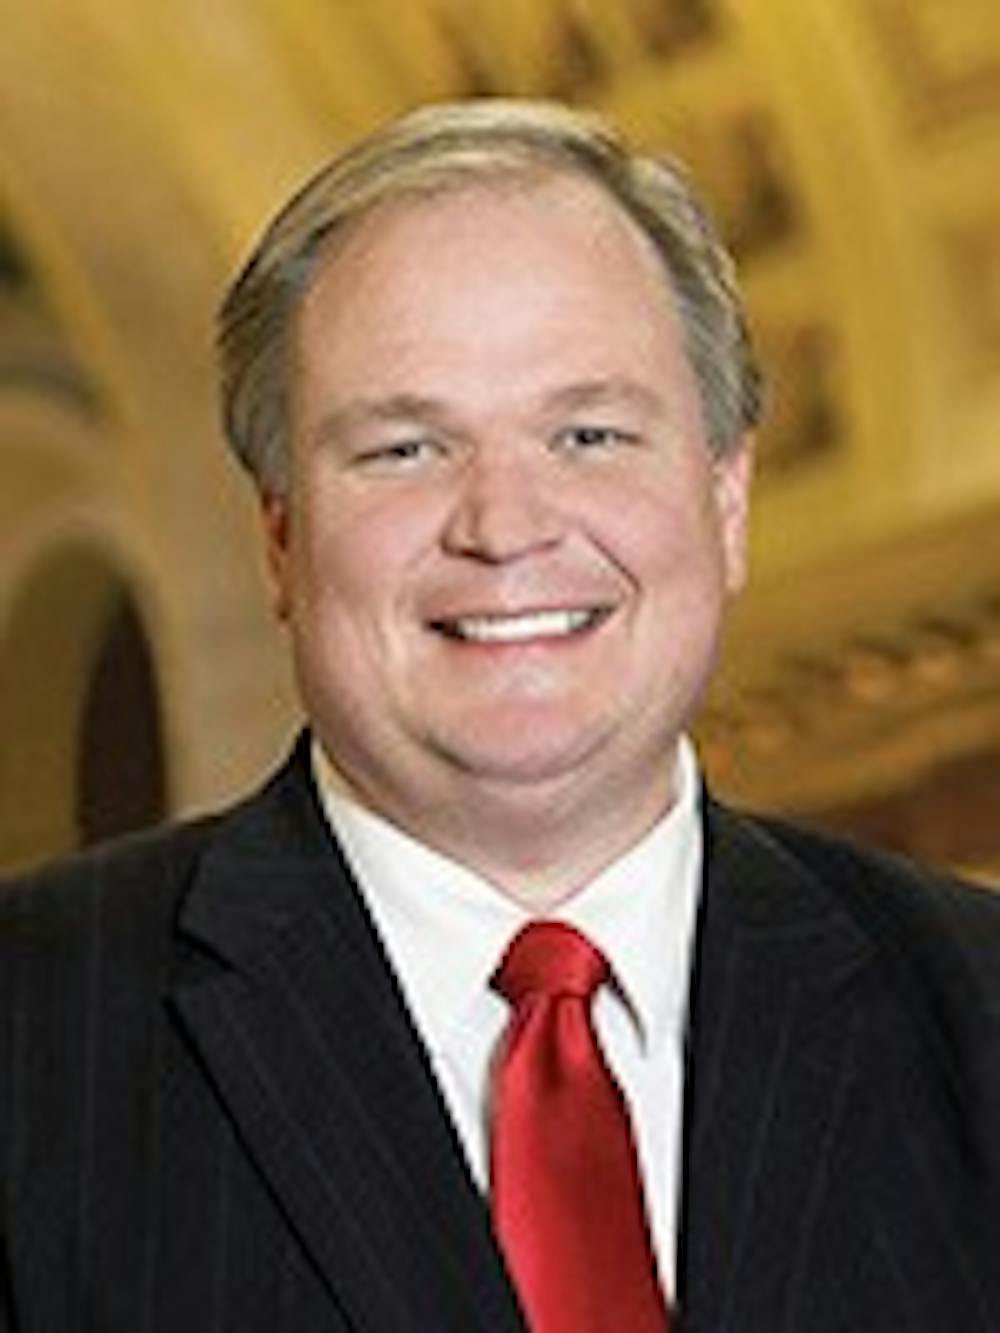 State lawmaker Rep. Andy Jorgensen, D-Milton, announced Wednesday he will not seek re-election to the Wisconsin legislature after serving since 2006.&nbsp;